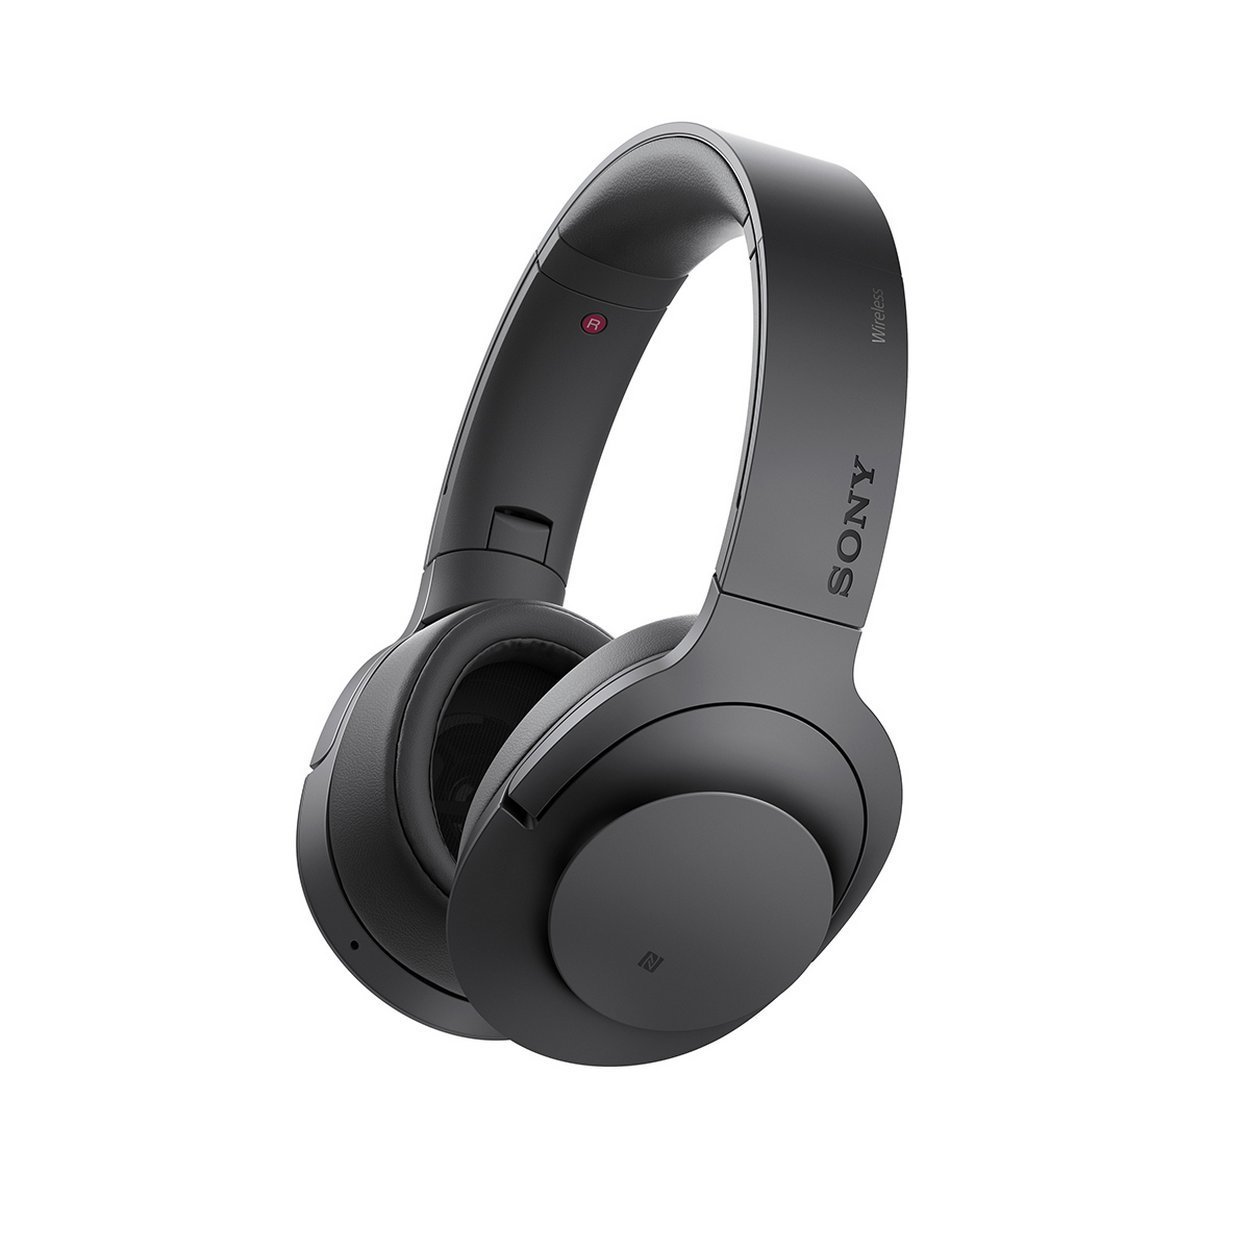 Sony&#039;s H.Ear Wireless Noise Cancelling Headphones Are 43% Off Today Only [Deal]